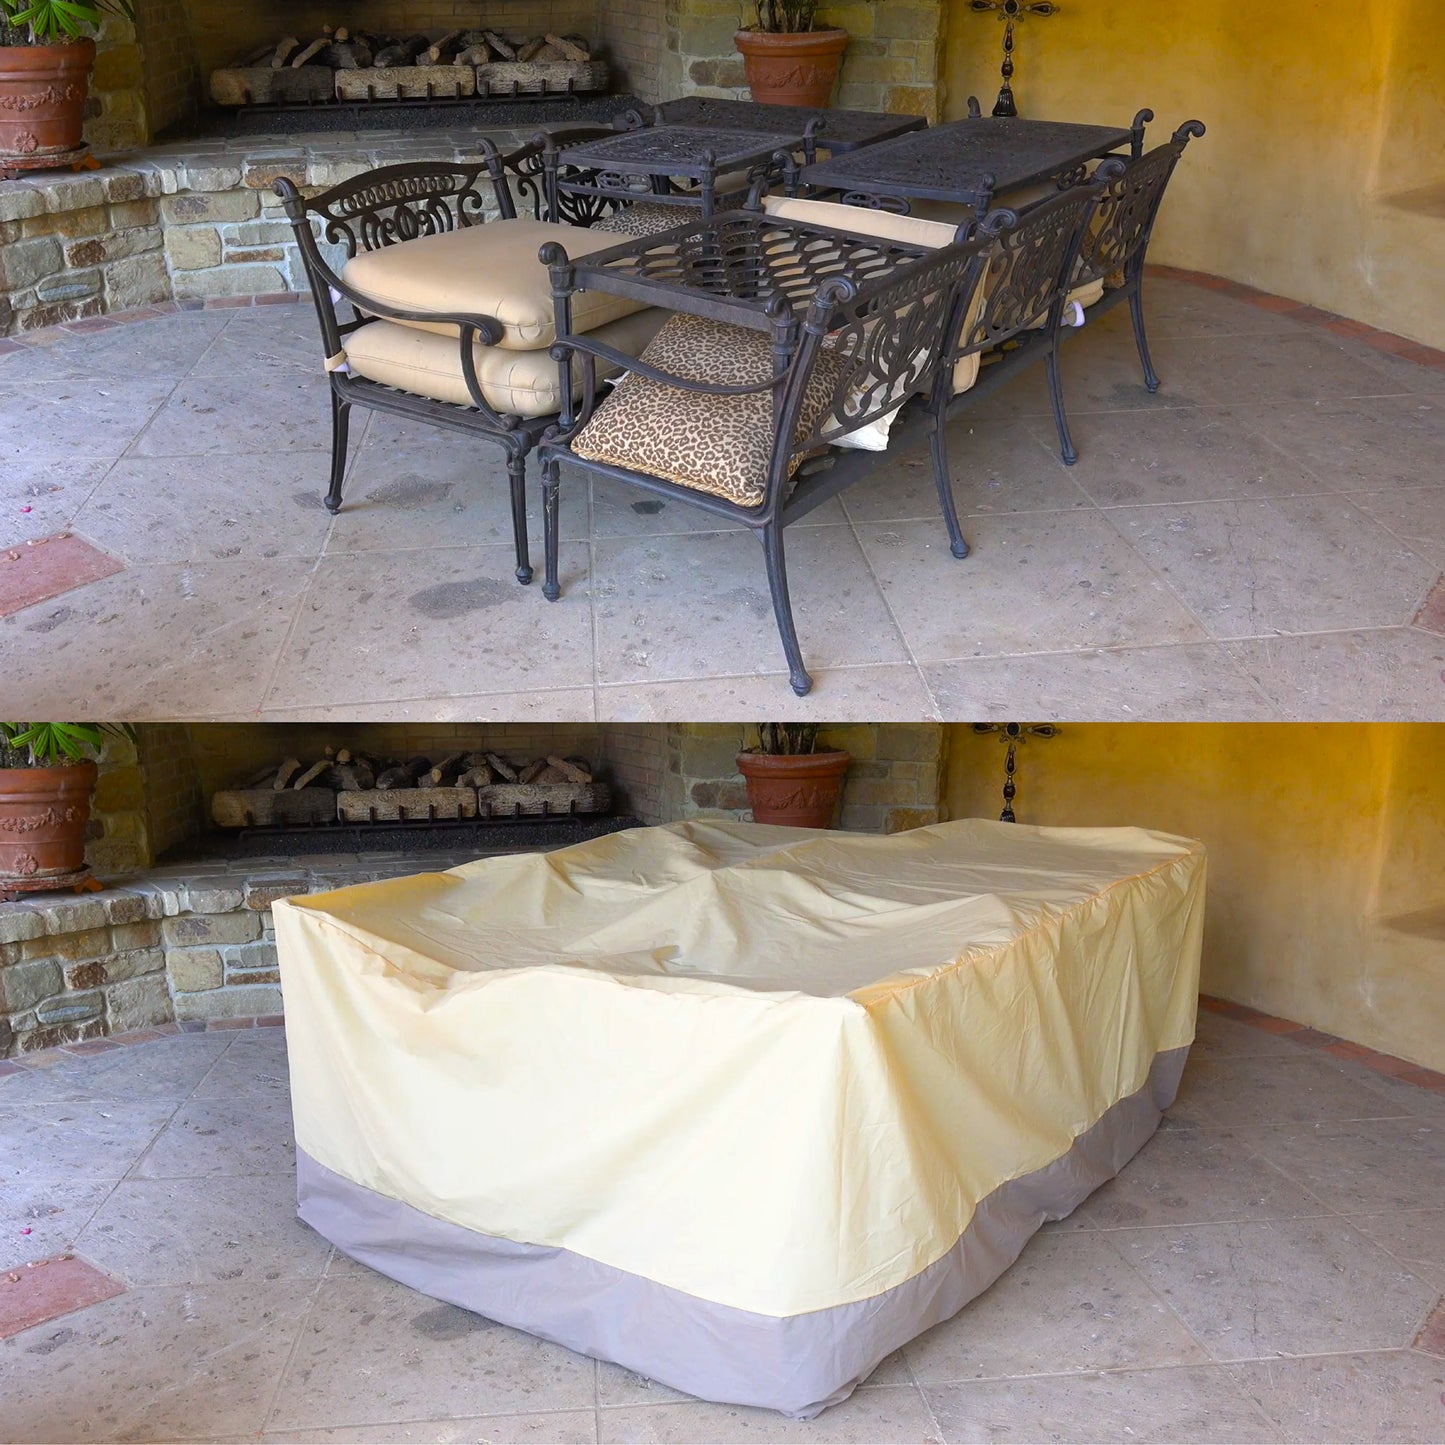 Sentinel Patio Covers